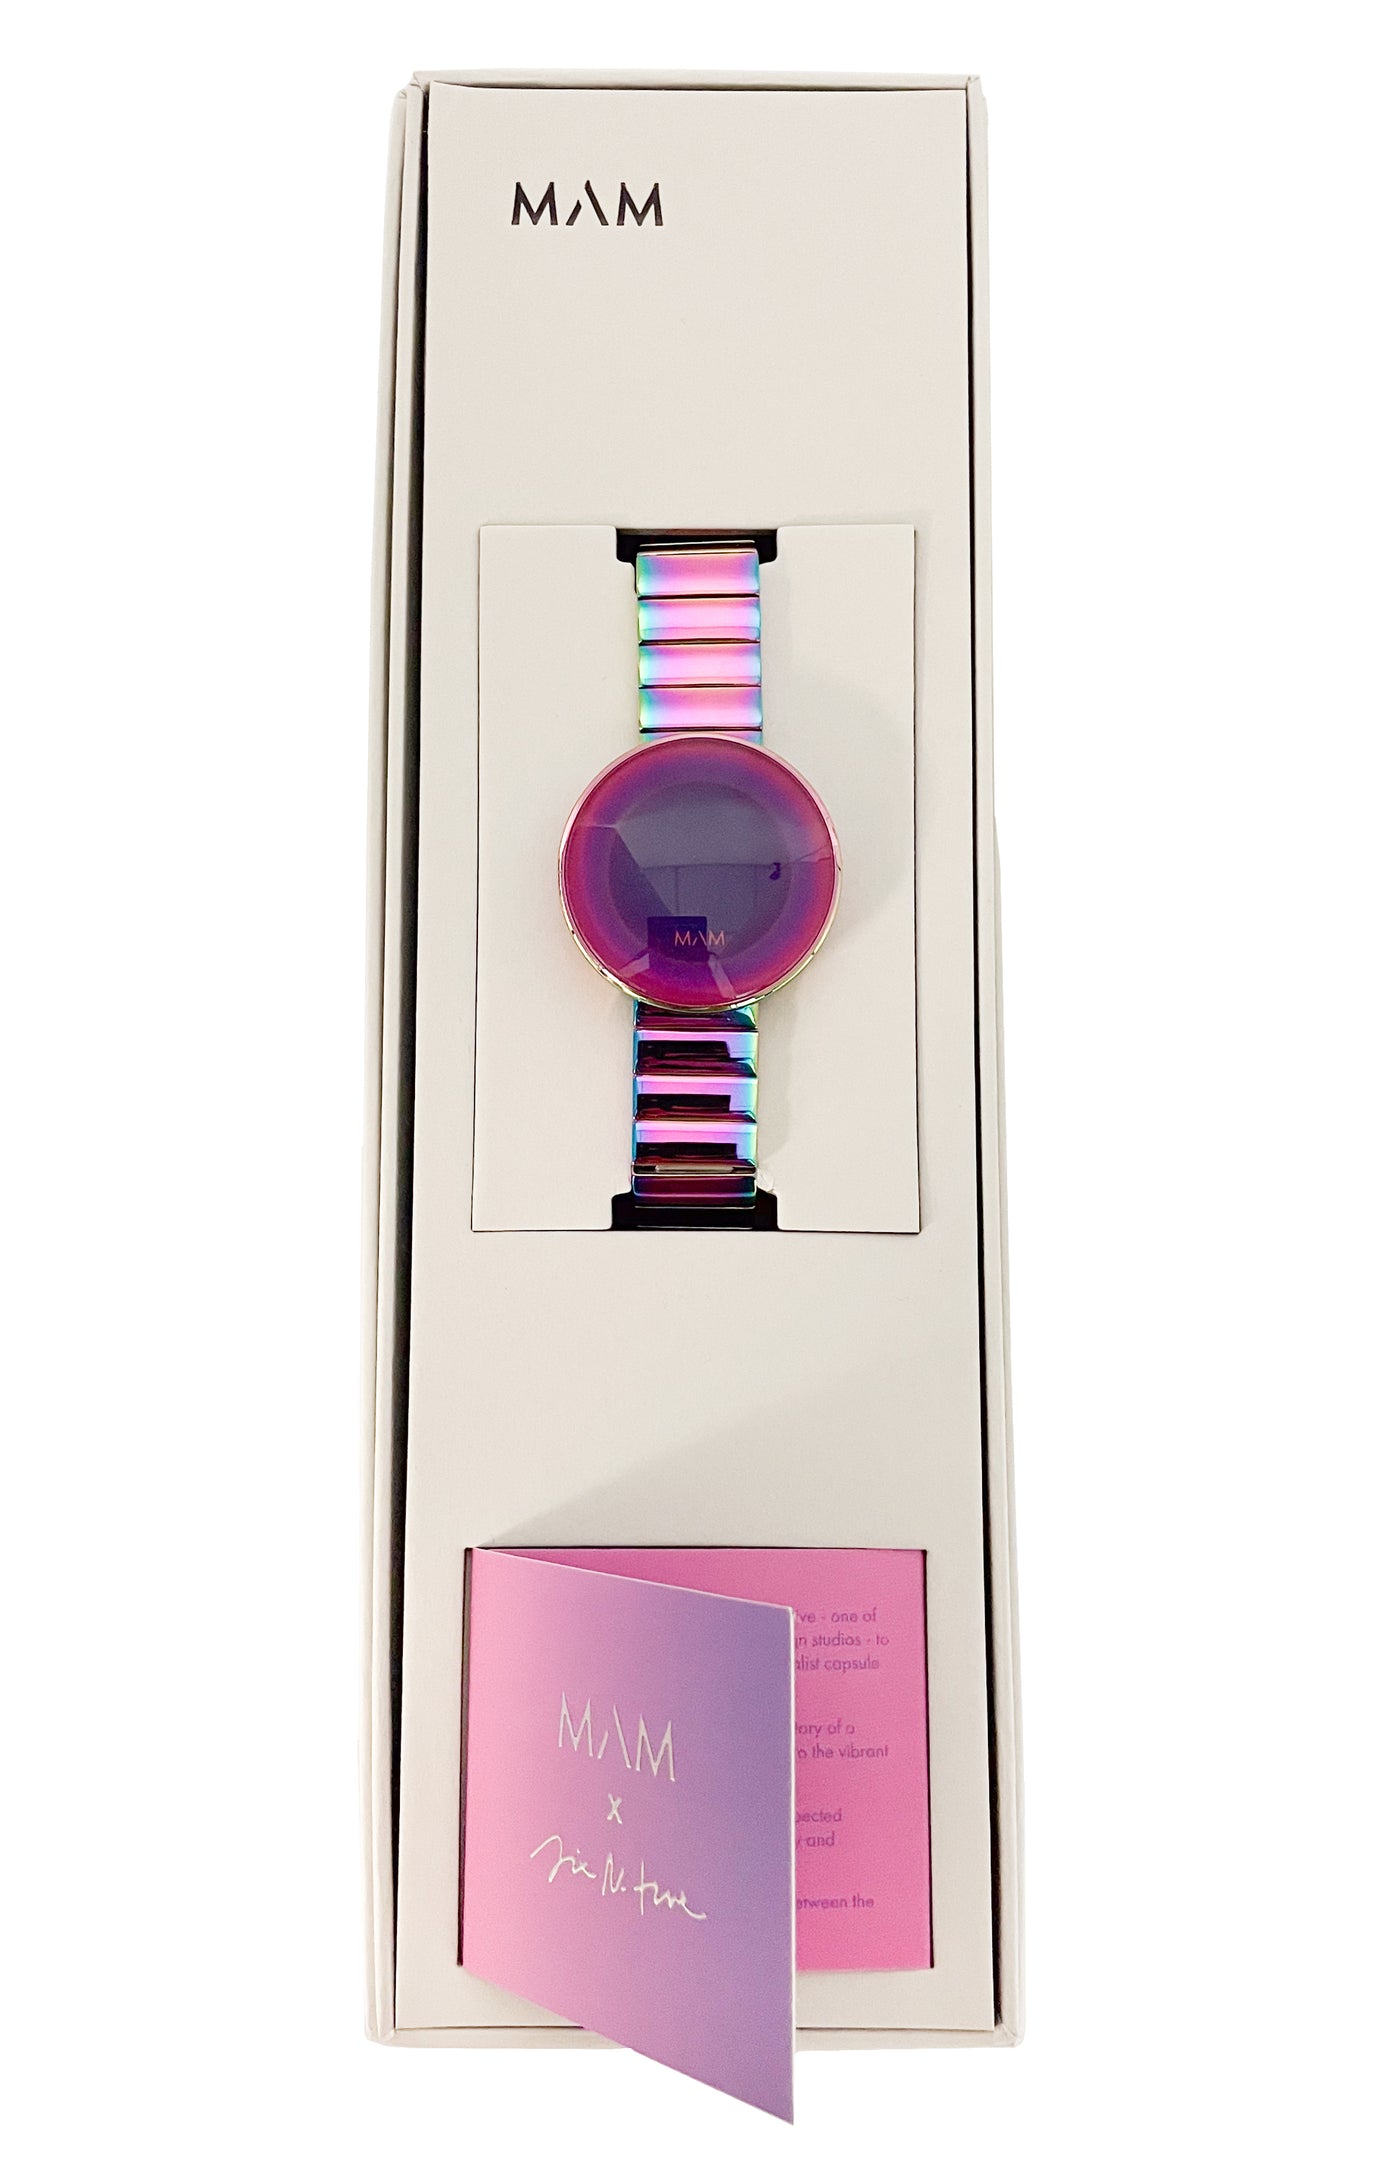 SixN.Five 006 Digital Watch in Purple - Discounts on Exclusive Designer at UAL